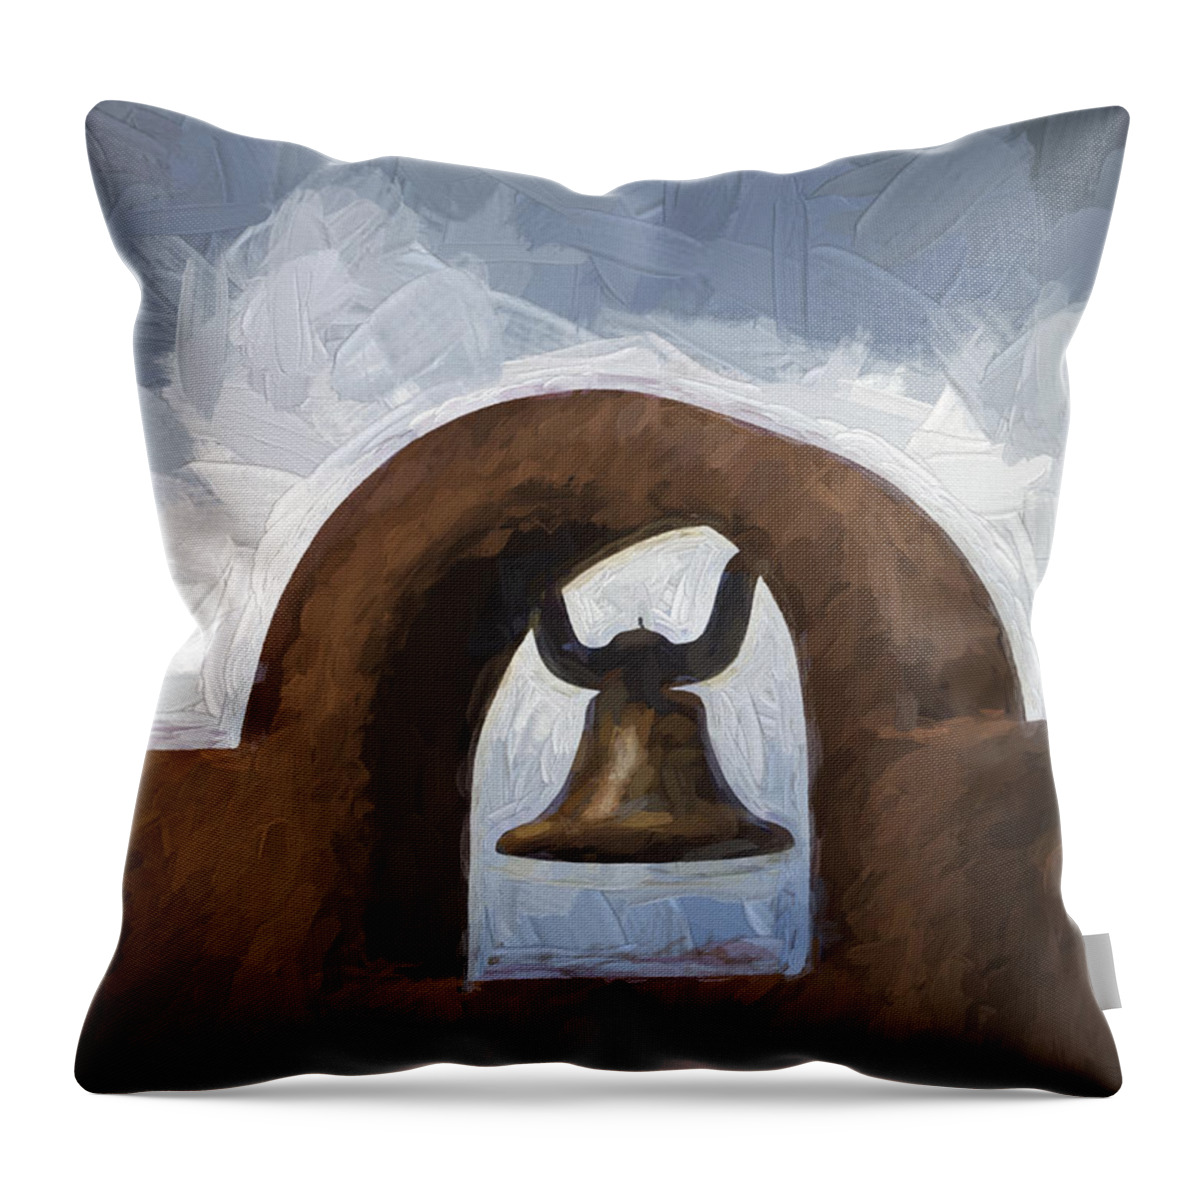 Chimayo Throw Pillow featuring the photograph Chapel Bell Chimayo Painterly Effect by Carol Leigh